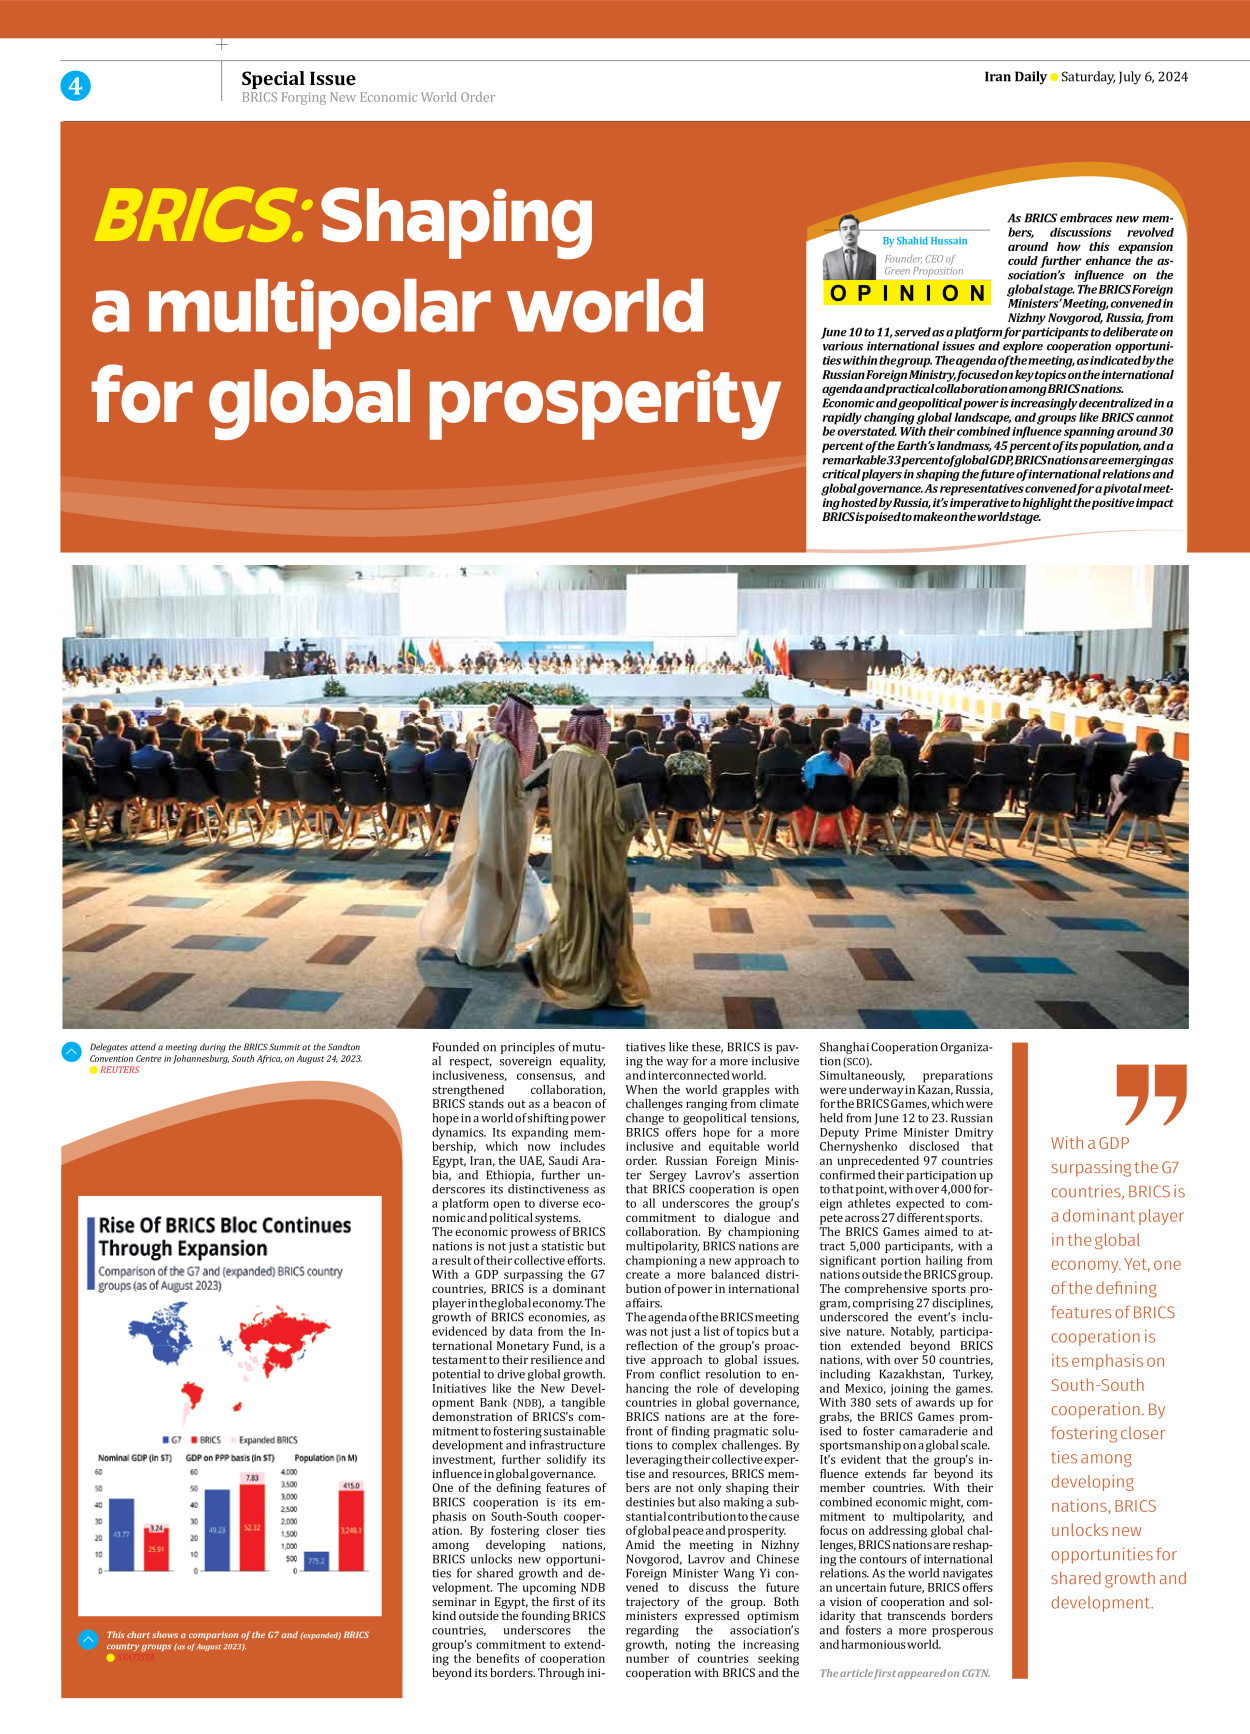 Iran Daily - Number Seven Thousand Five Hundred and Ninety Seven - 06 July 2024 - Page 4